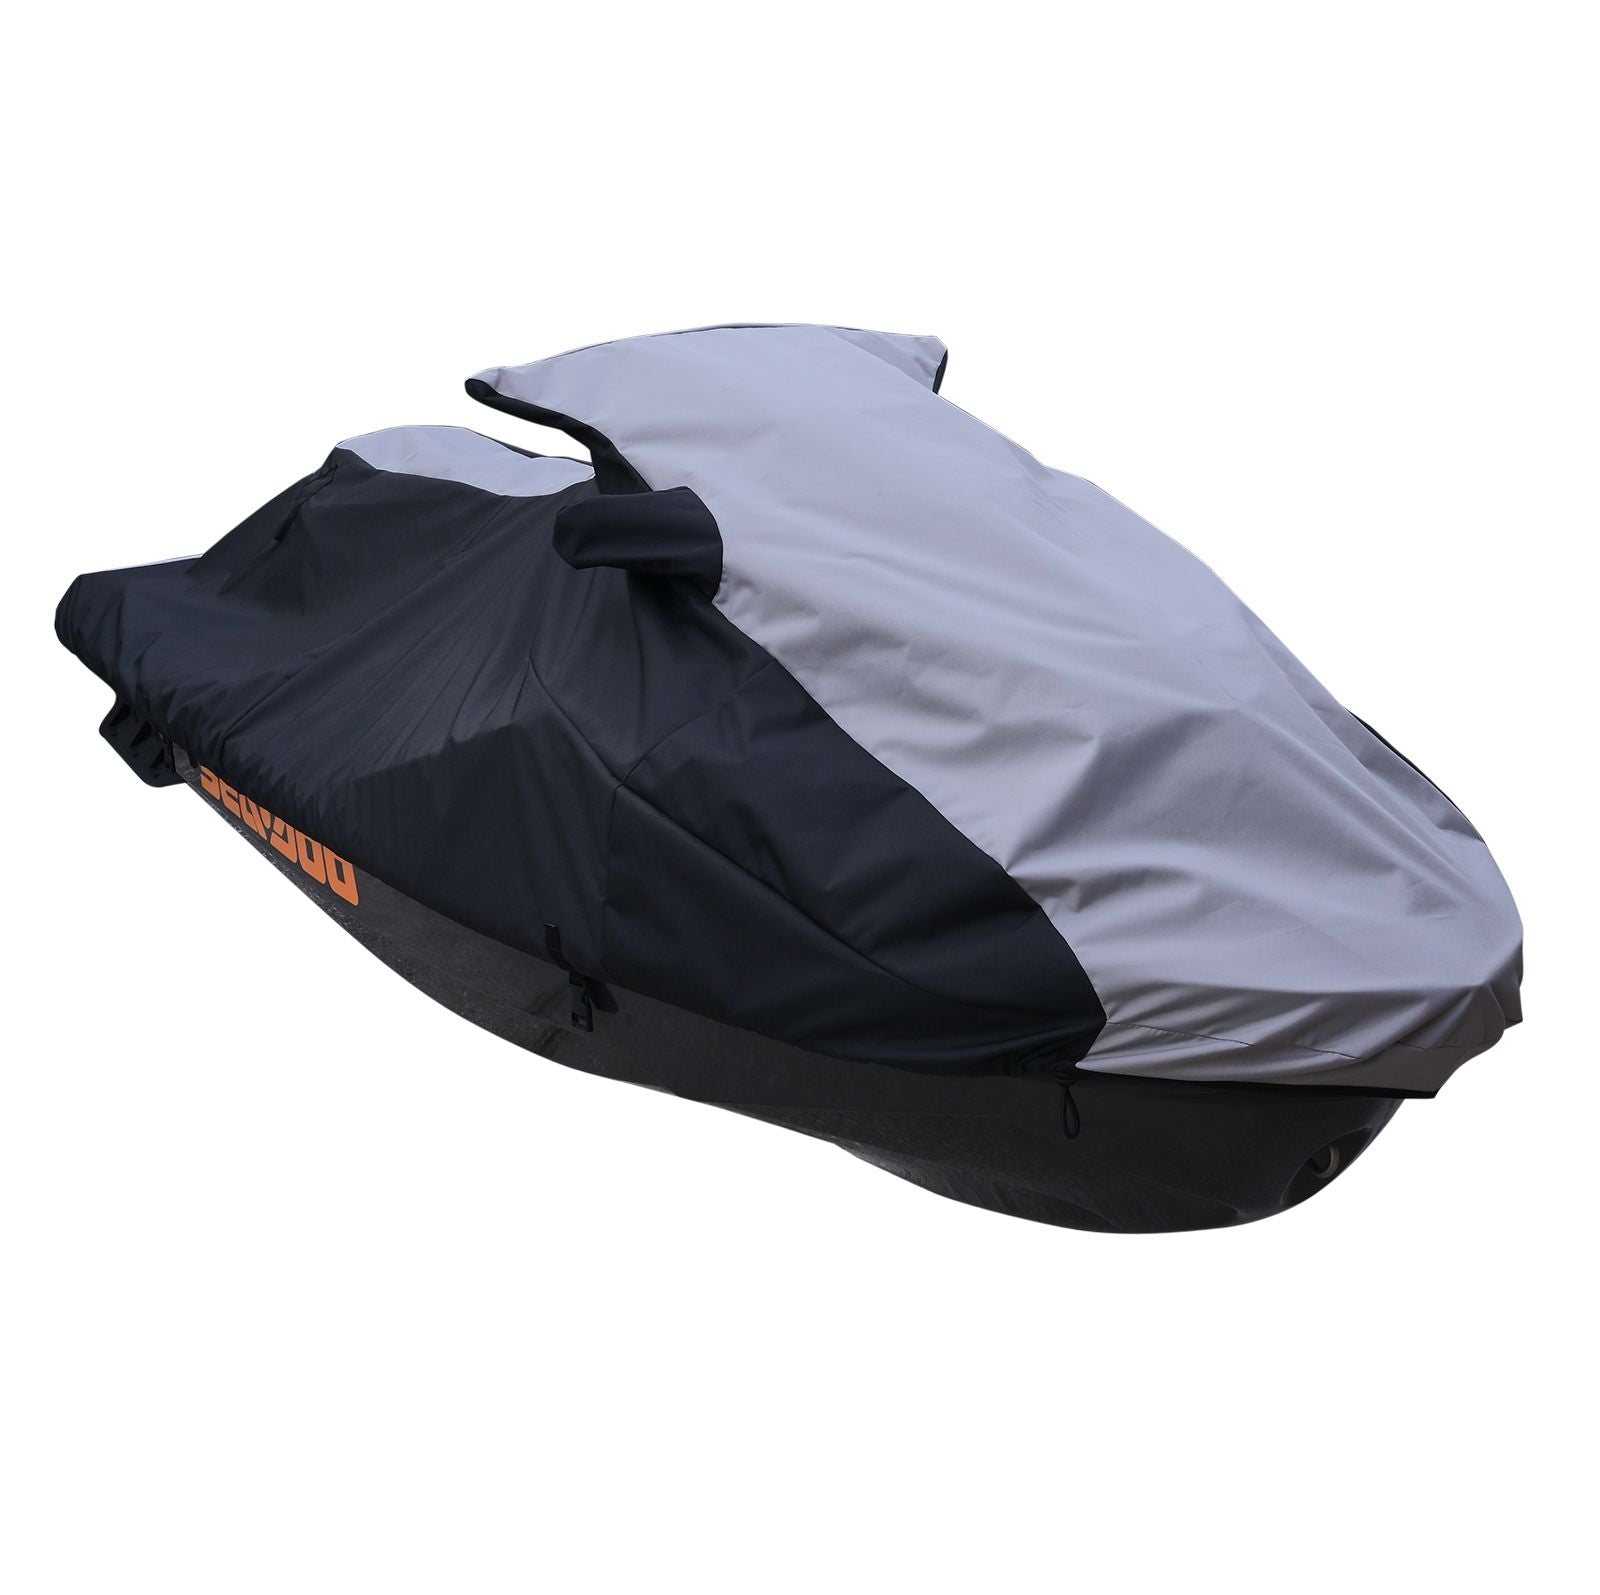 Trailerable Storage cover with vents for Kawasaki 2007-2008 Ultra 250/Ultra LX/2008 Ultra 250/2009-2010 Ultra 260X/2011-201